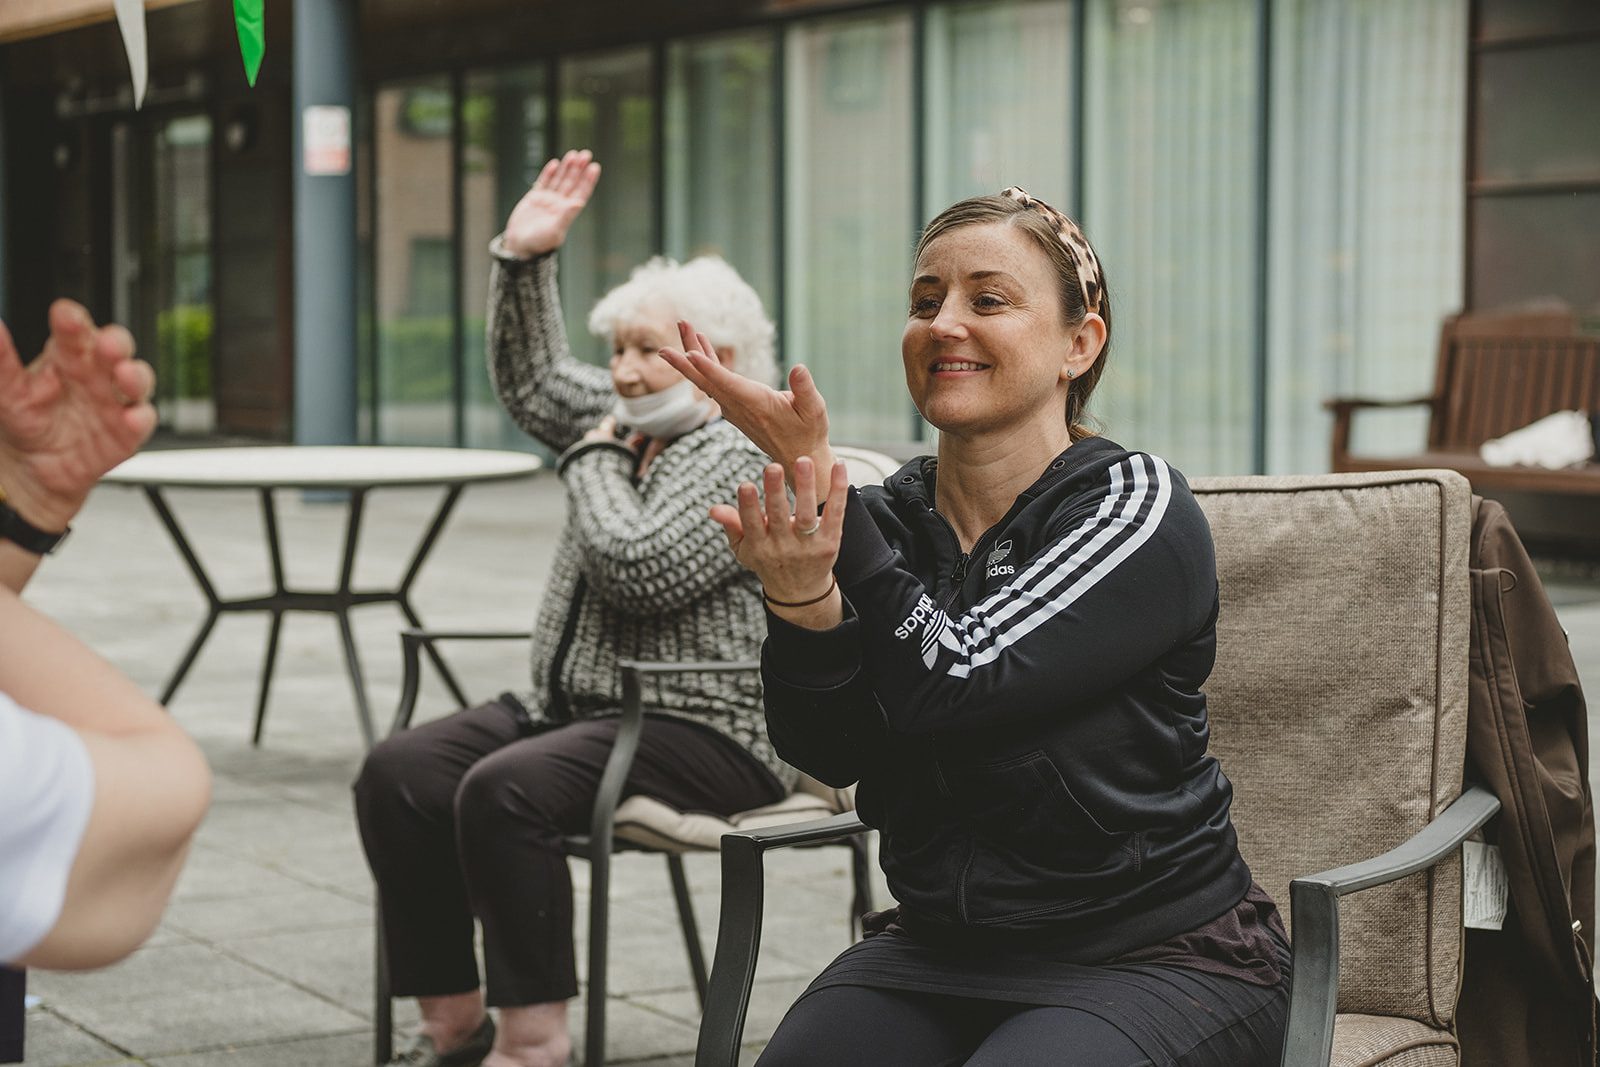 A woman in her forties demonstrates dance moves to a group of older people